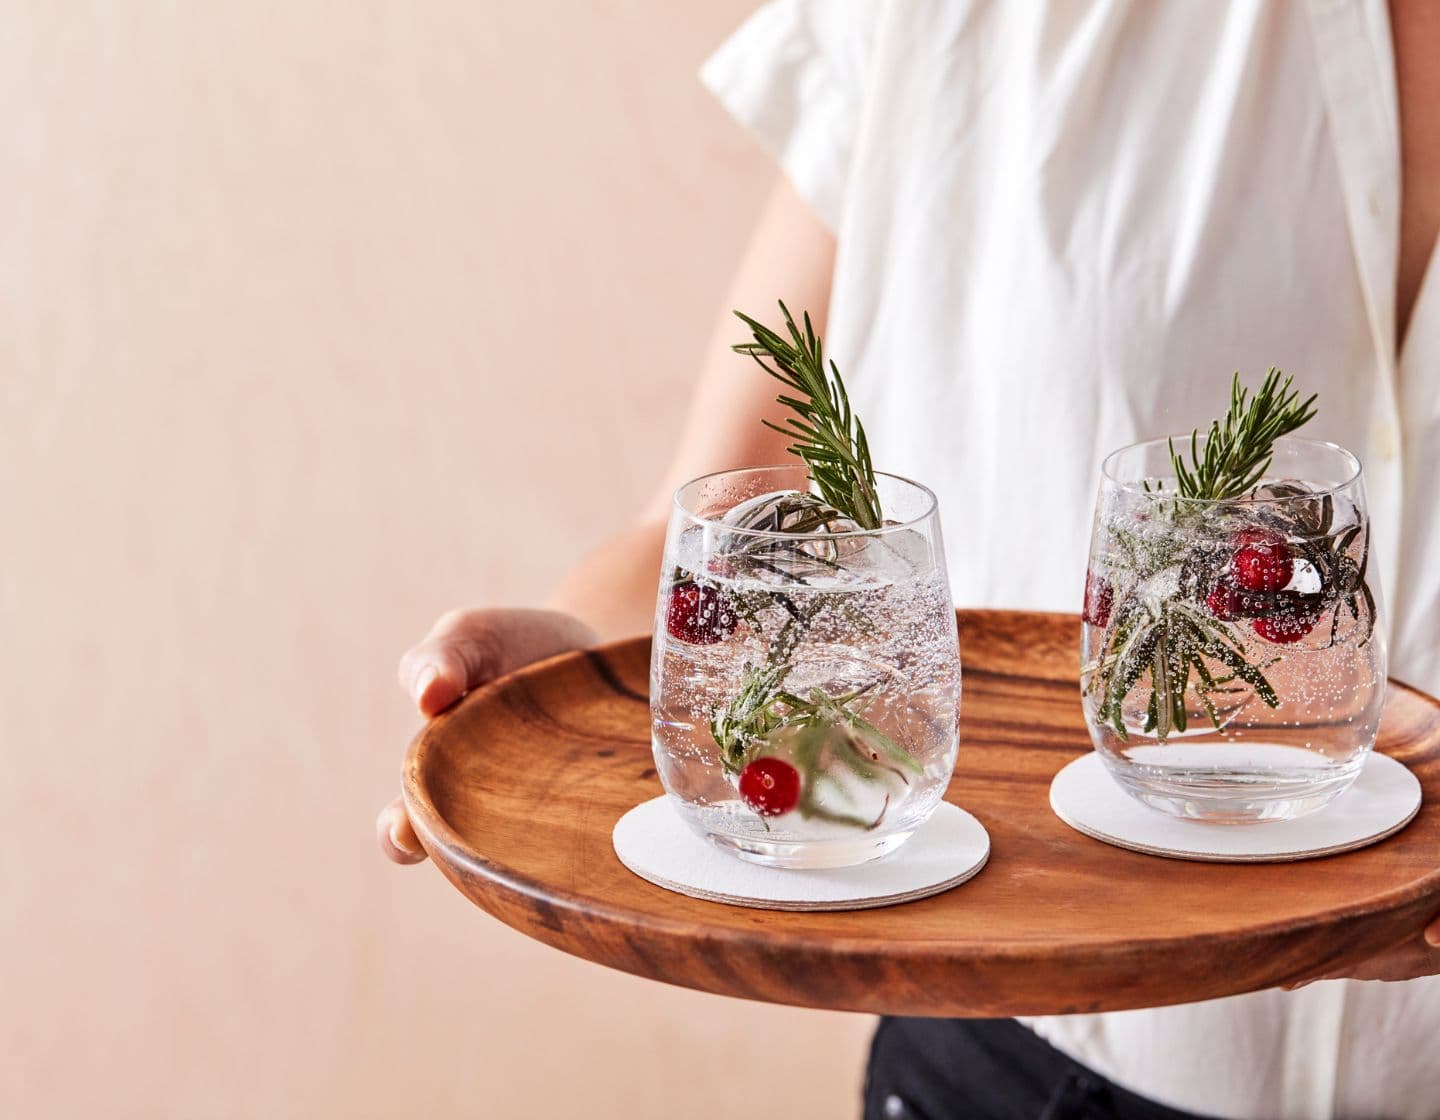 Serving two sustainable cocktails  